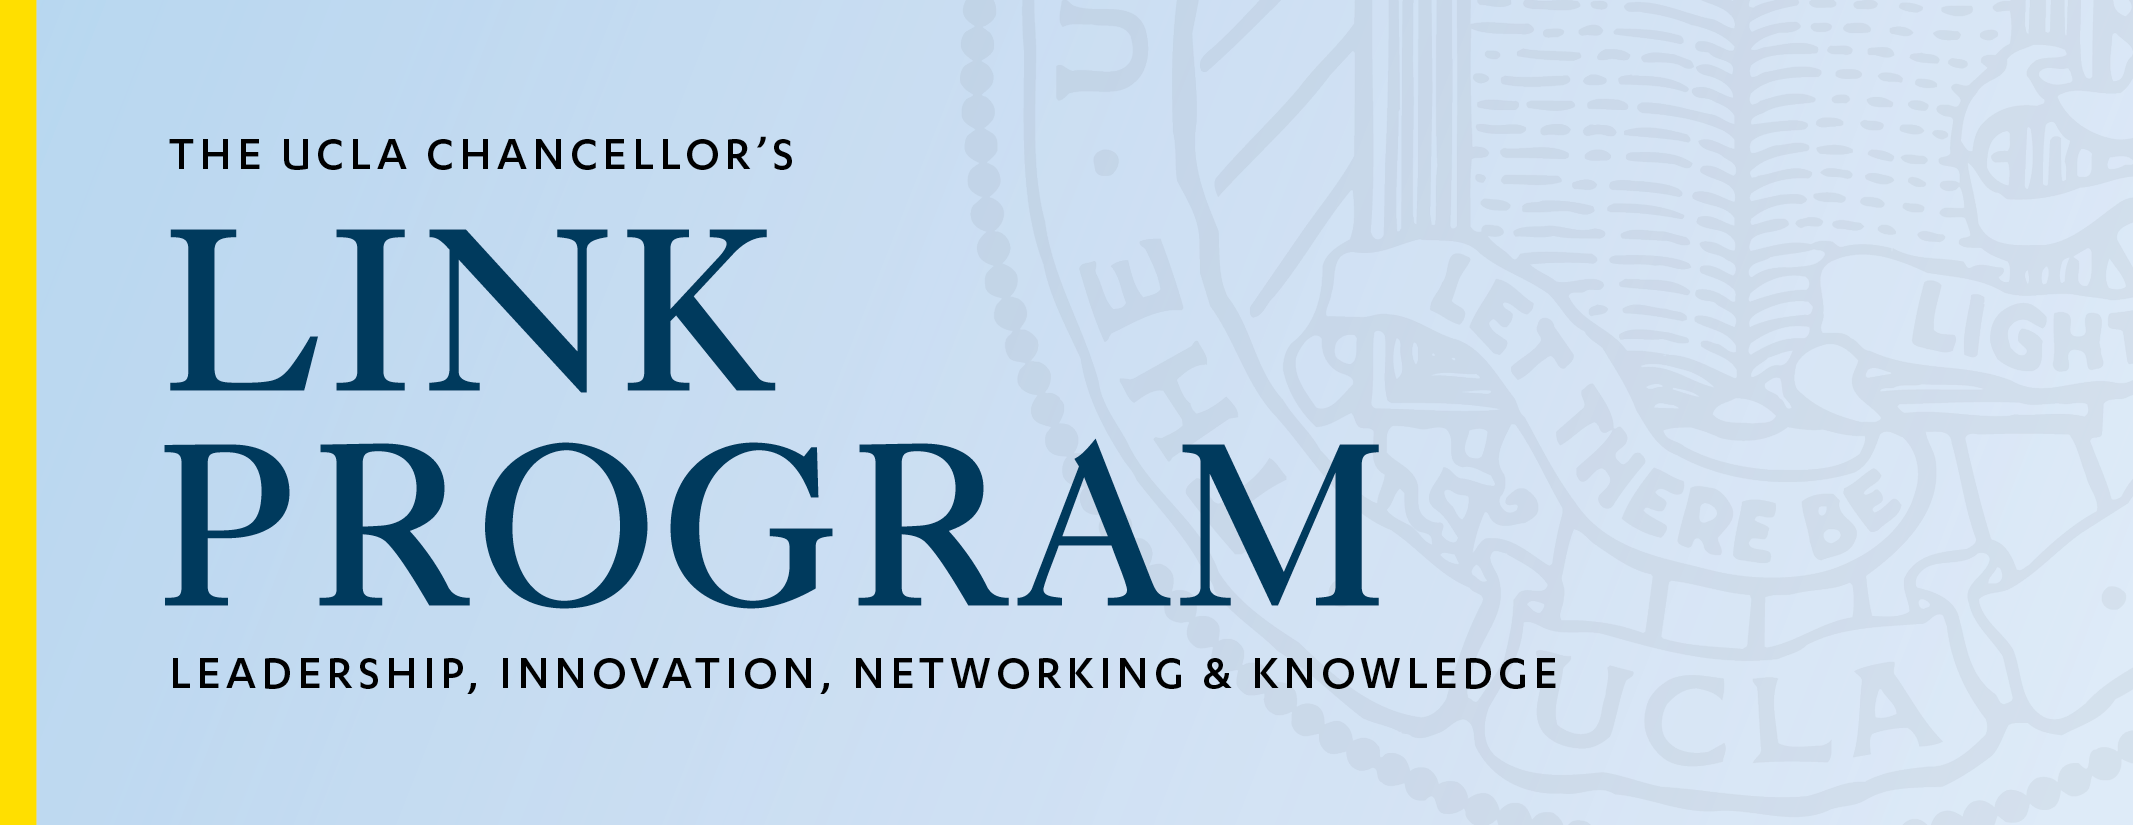 The UCLA Chancellor's LINK Program- Leadership, innovation, networking, and knowledge